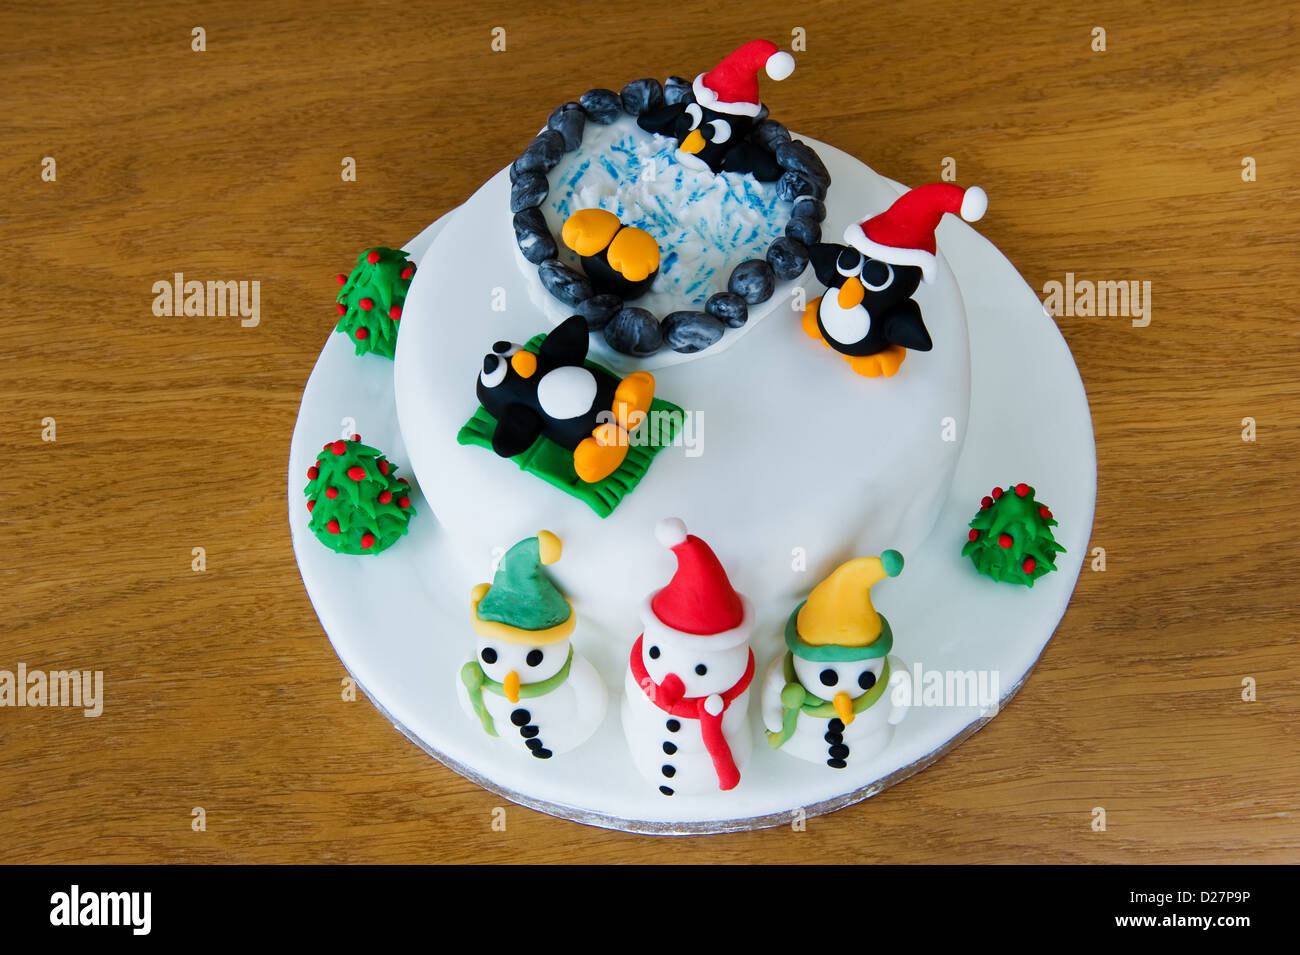 Novelty christmas cake, decorated with amusing penguins and snowmen. Stock Photo